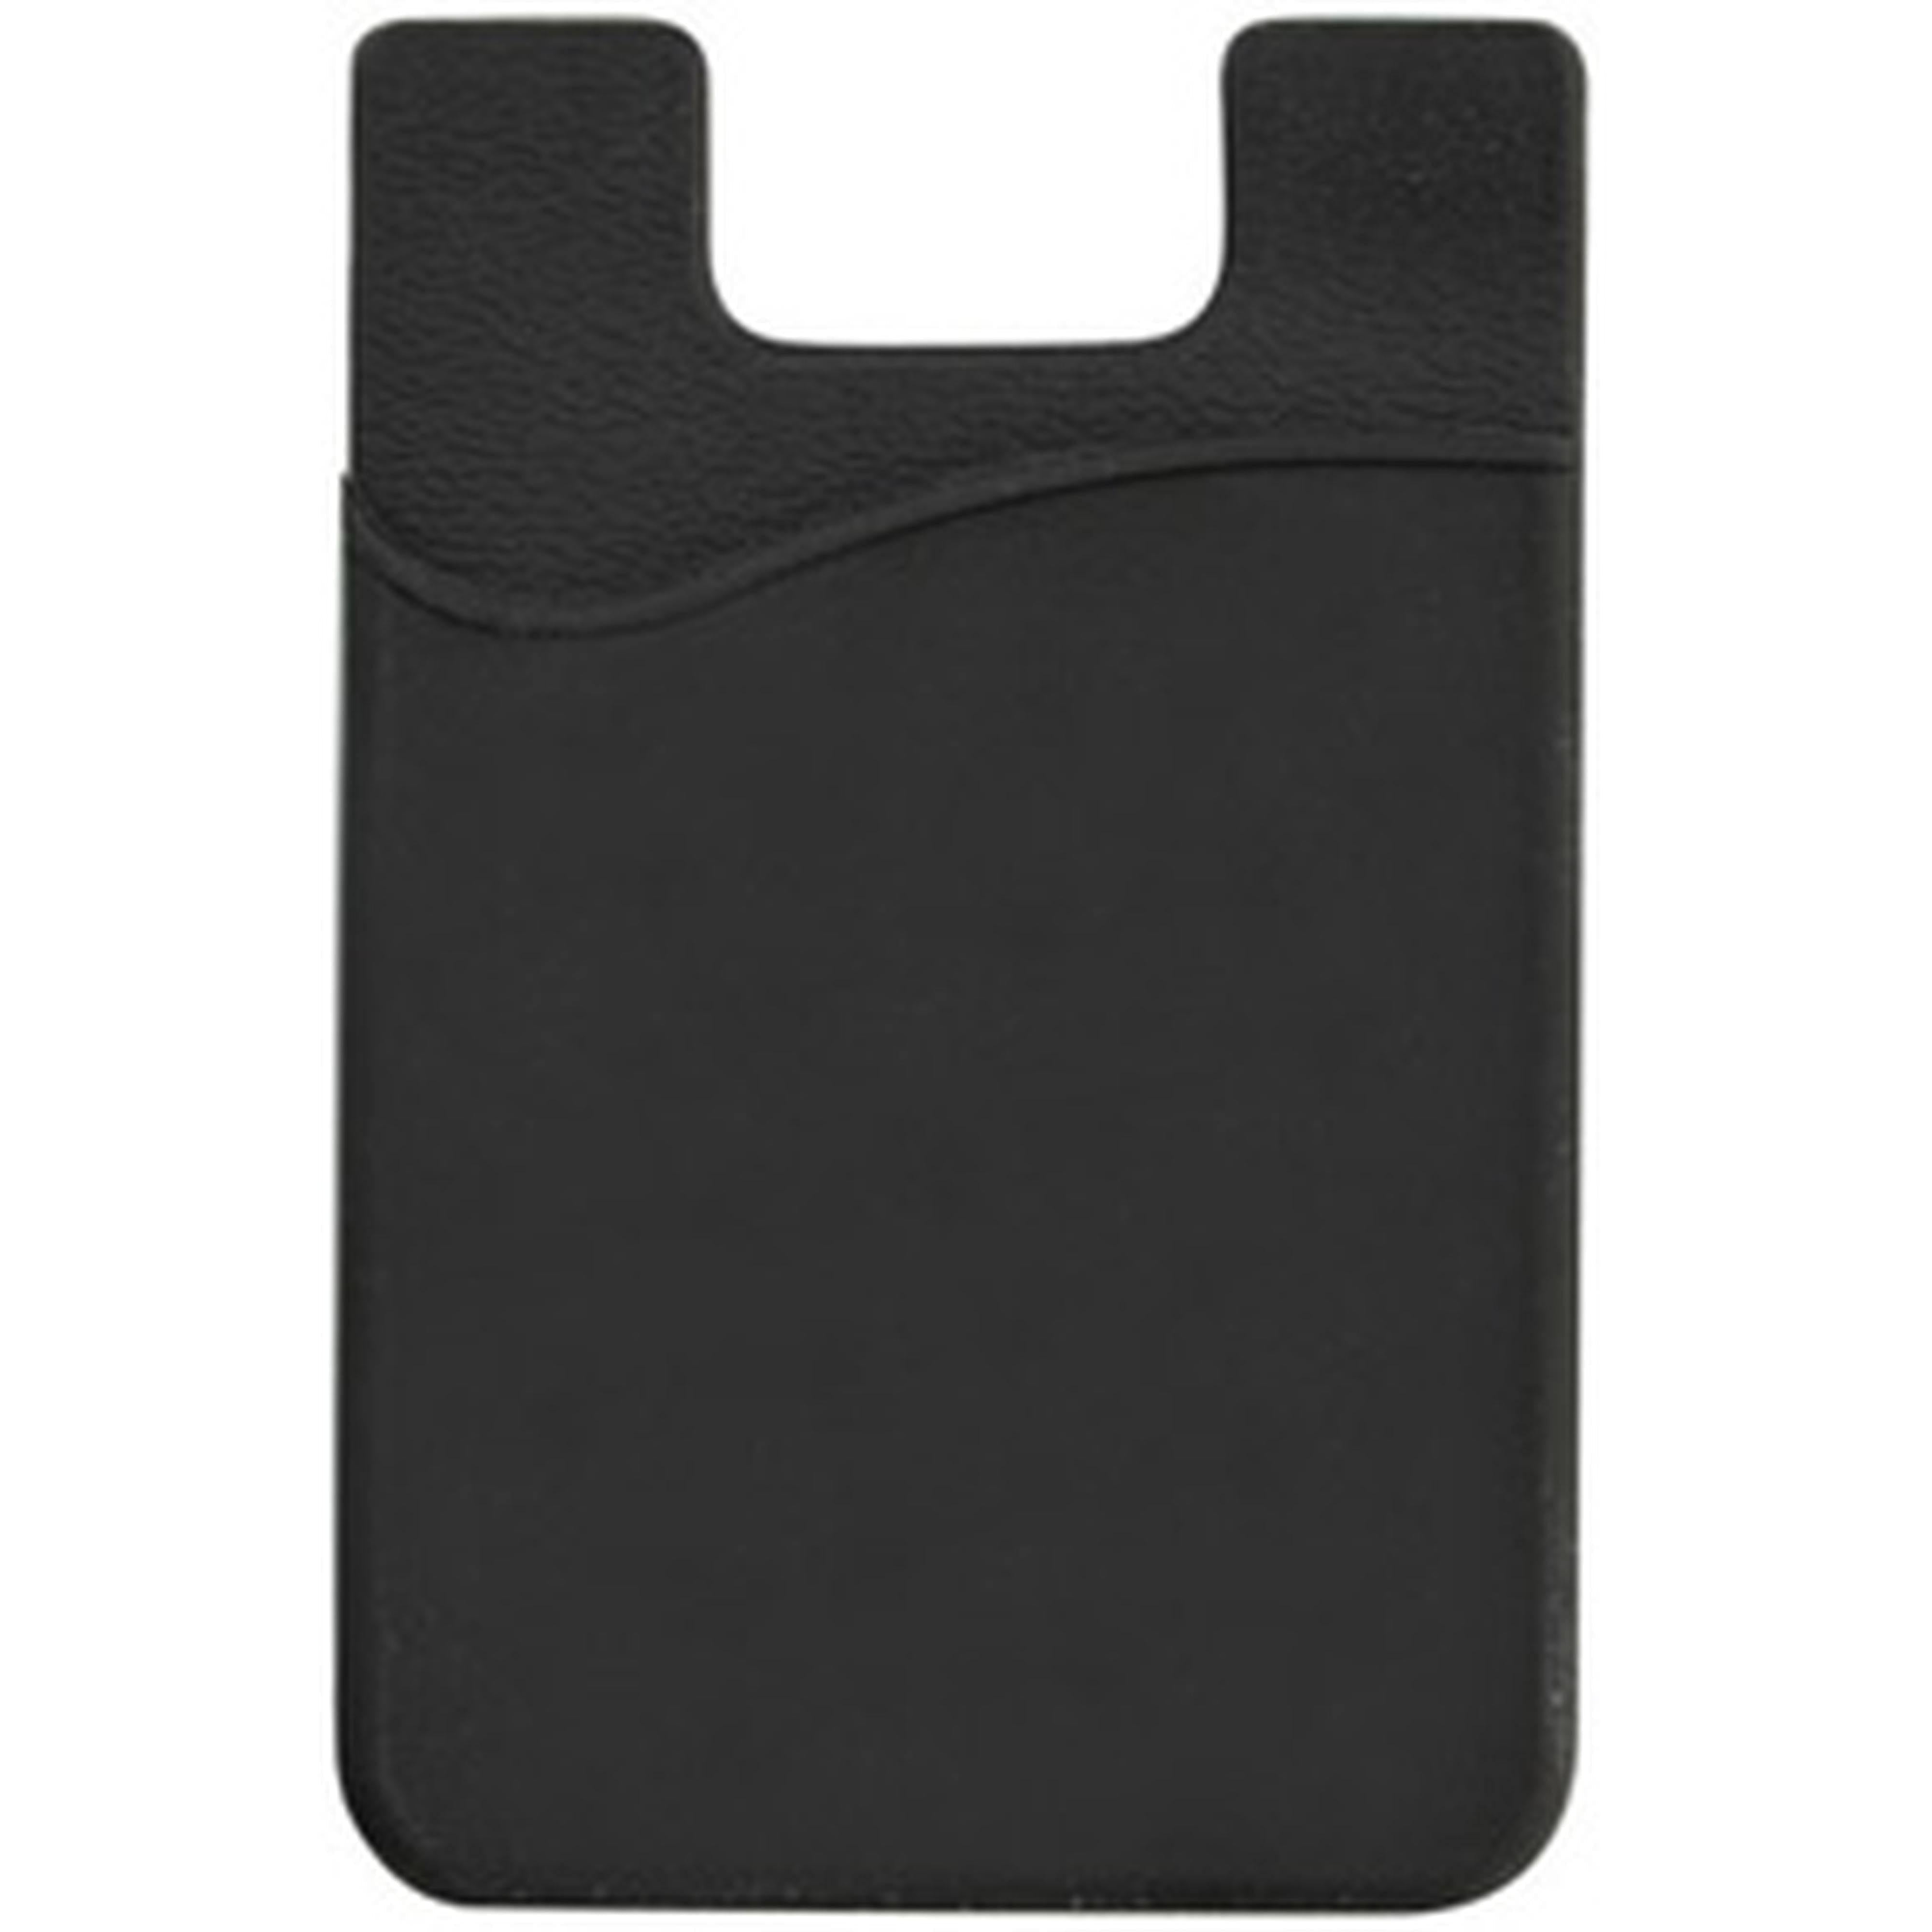 Silicone Cell Phone Wallet Black